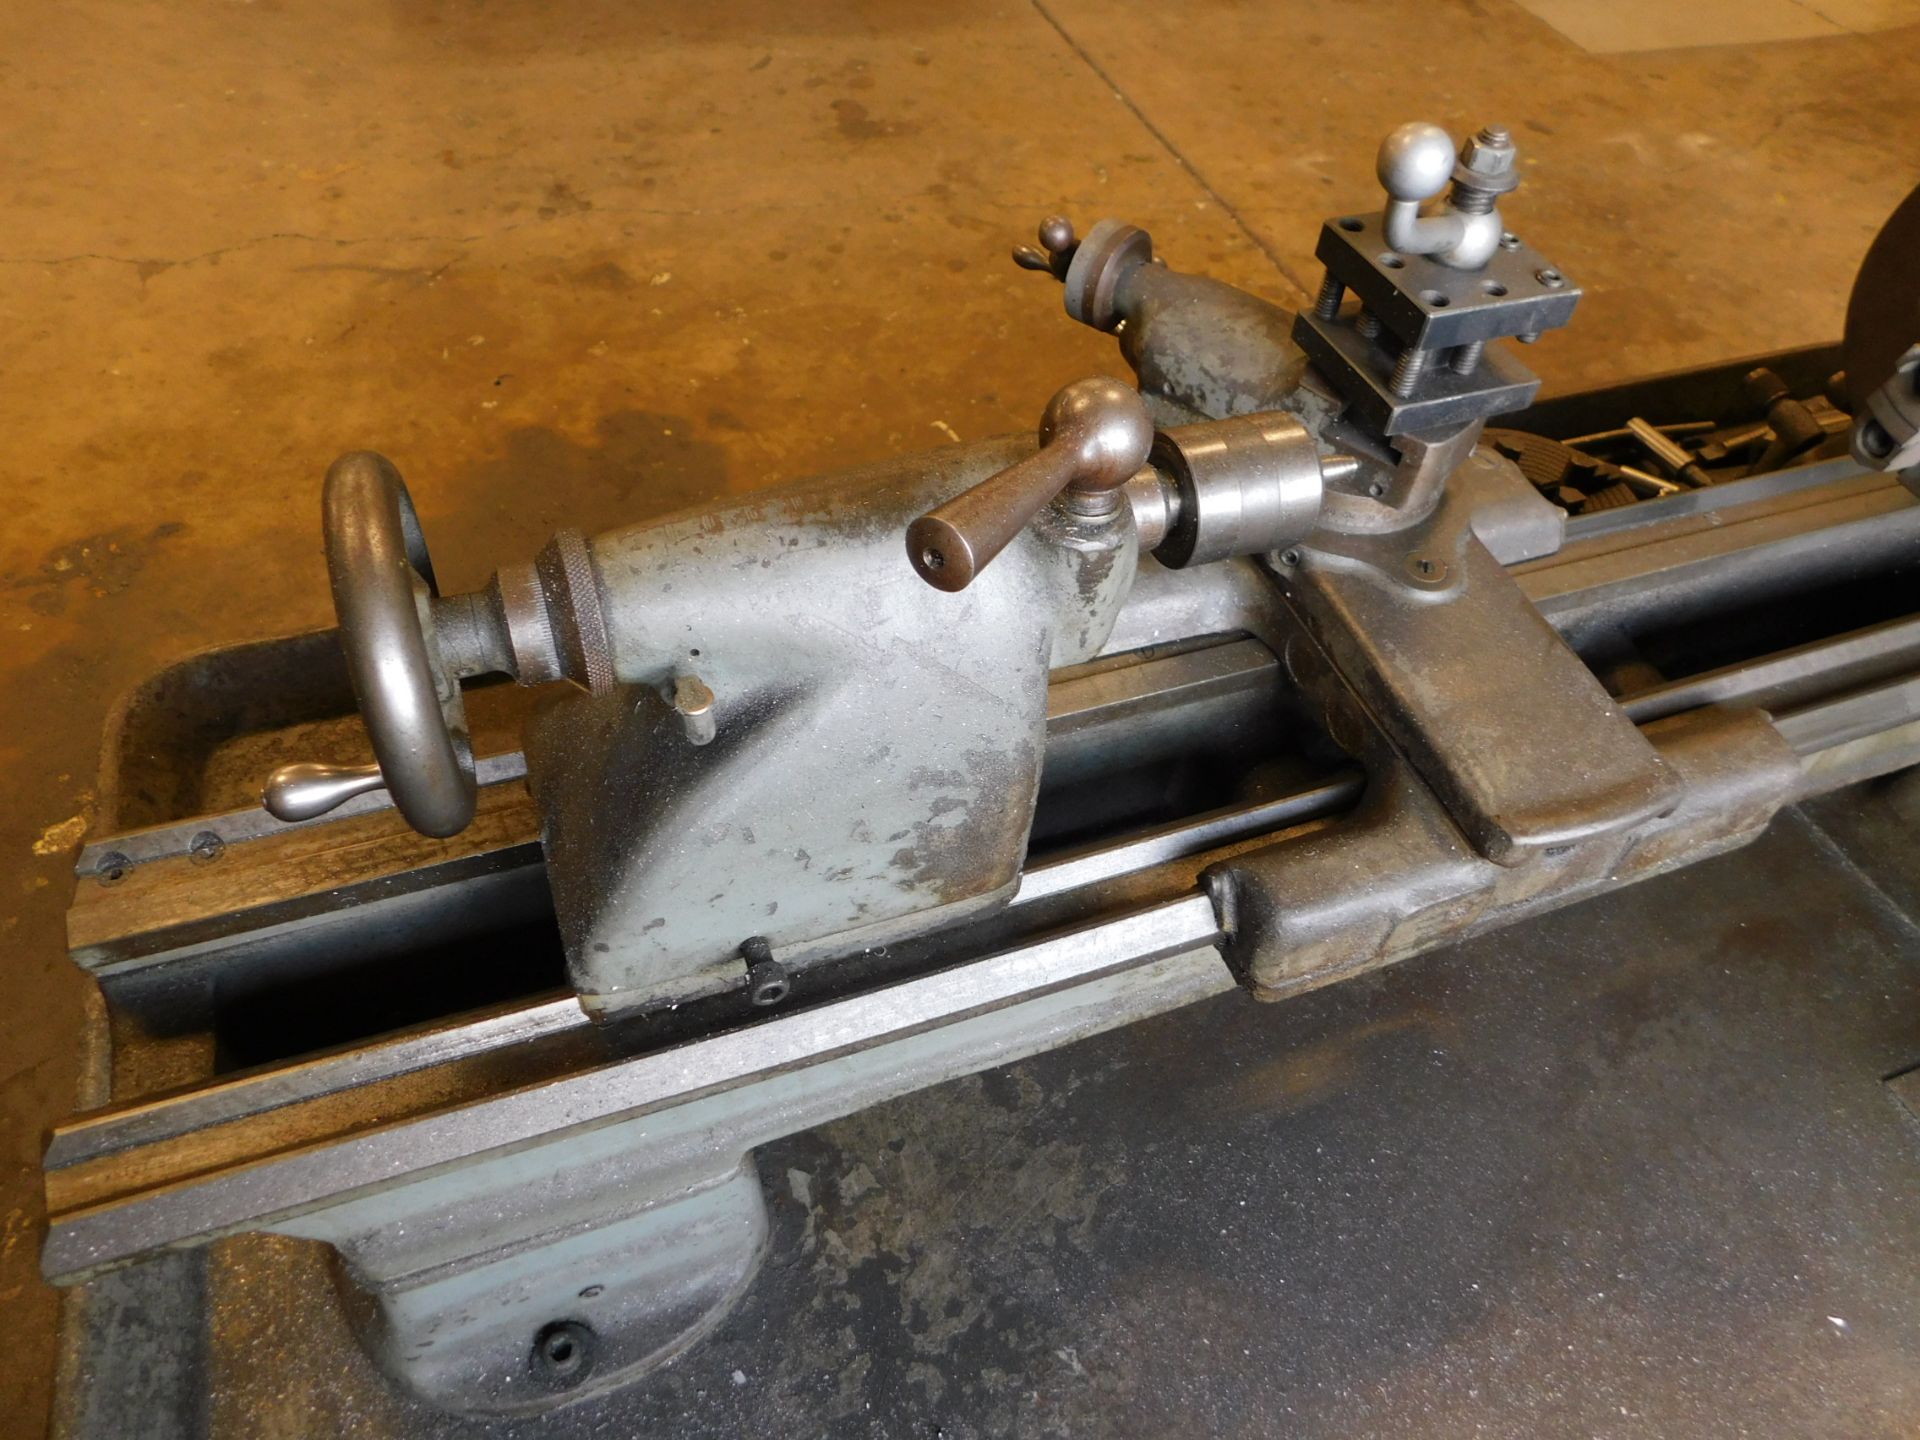 South Bend 10 In. X 24 In. Bench Model Lathe with Cabinet Base, s/n 34271K, 6 In. 3-Jaw and 6 In. - Image 5 of 16